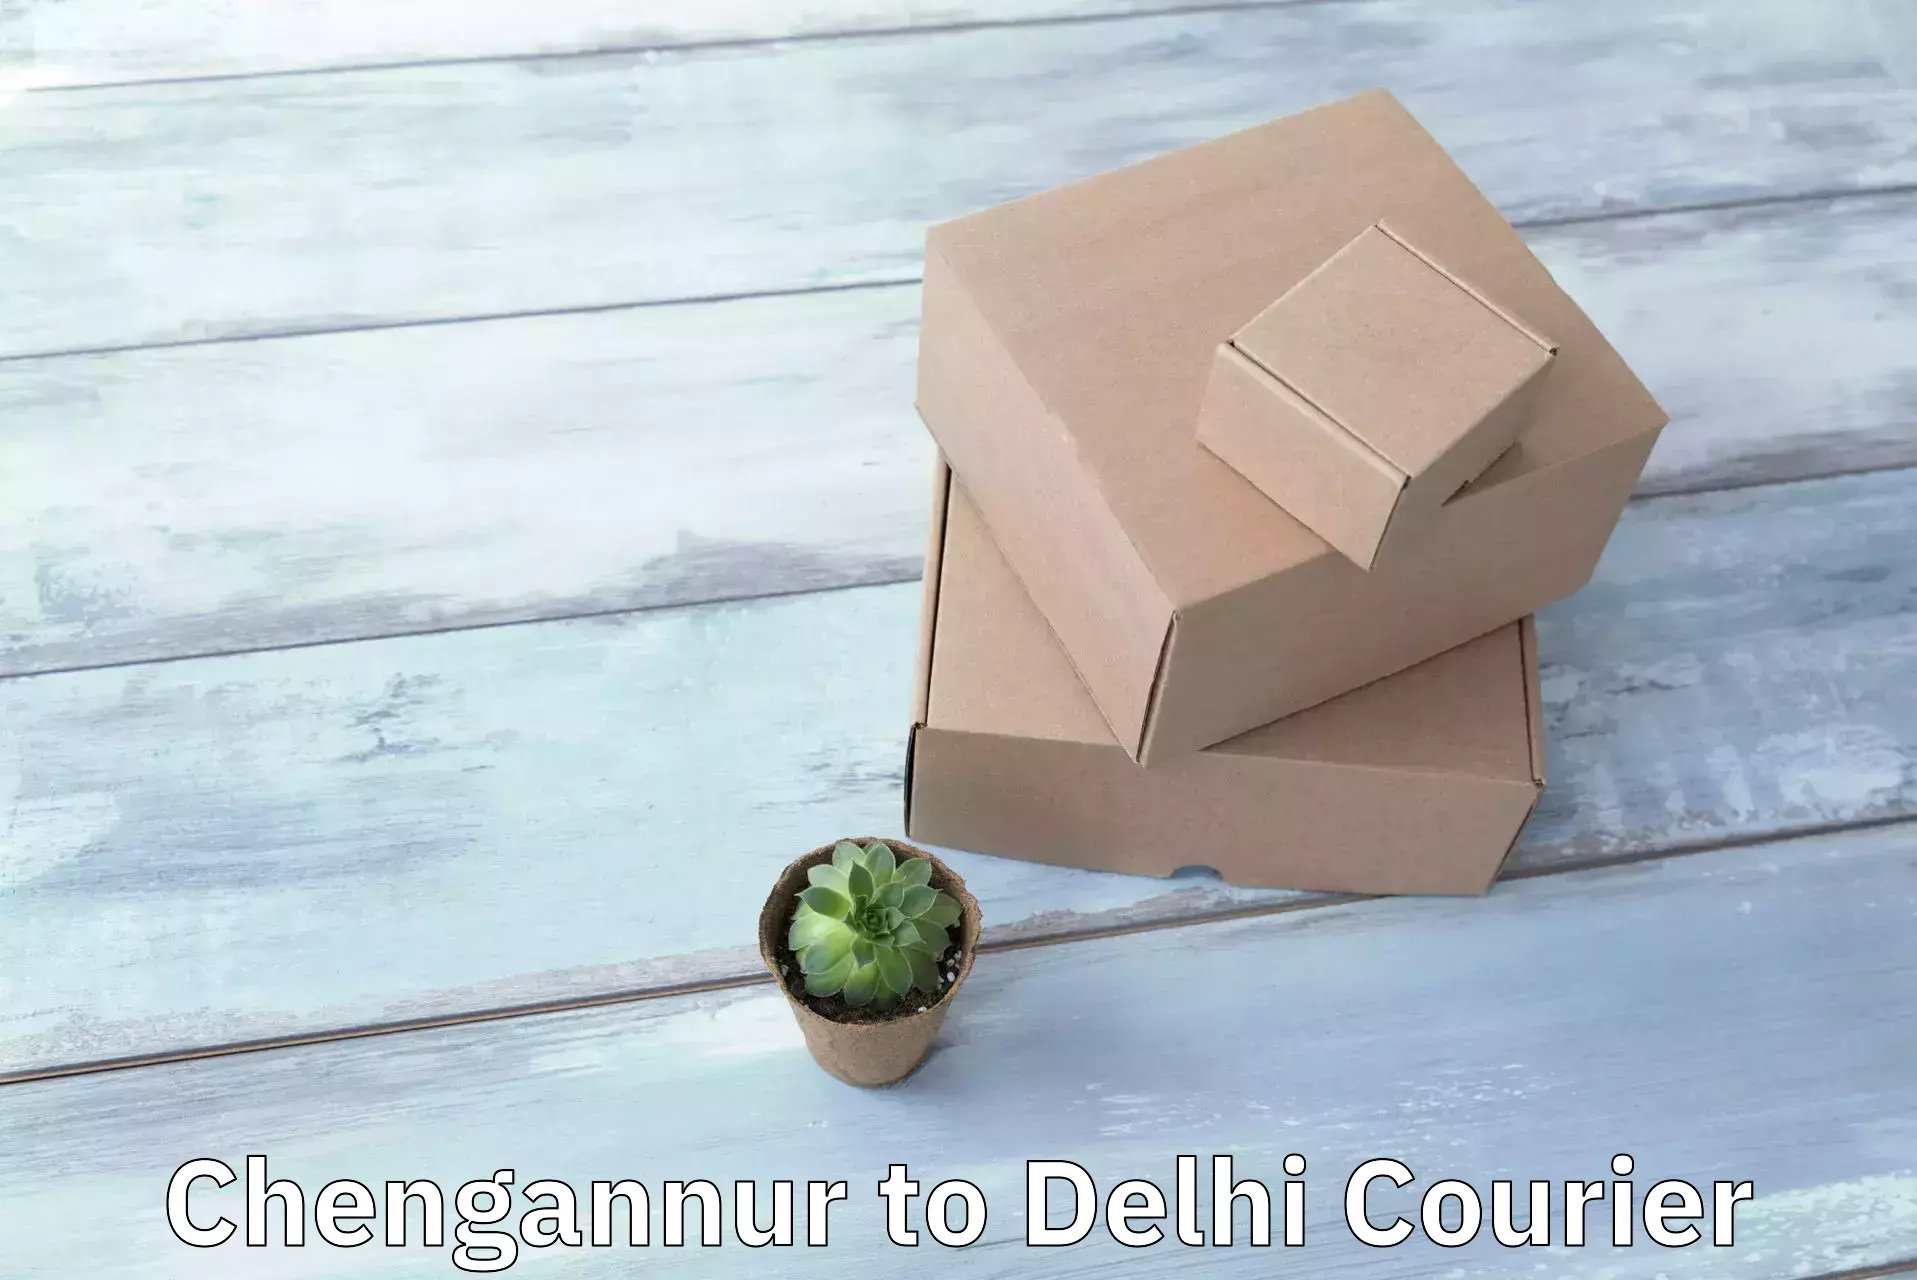 Automated parcel services Chengannur to East Delhi